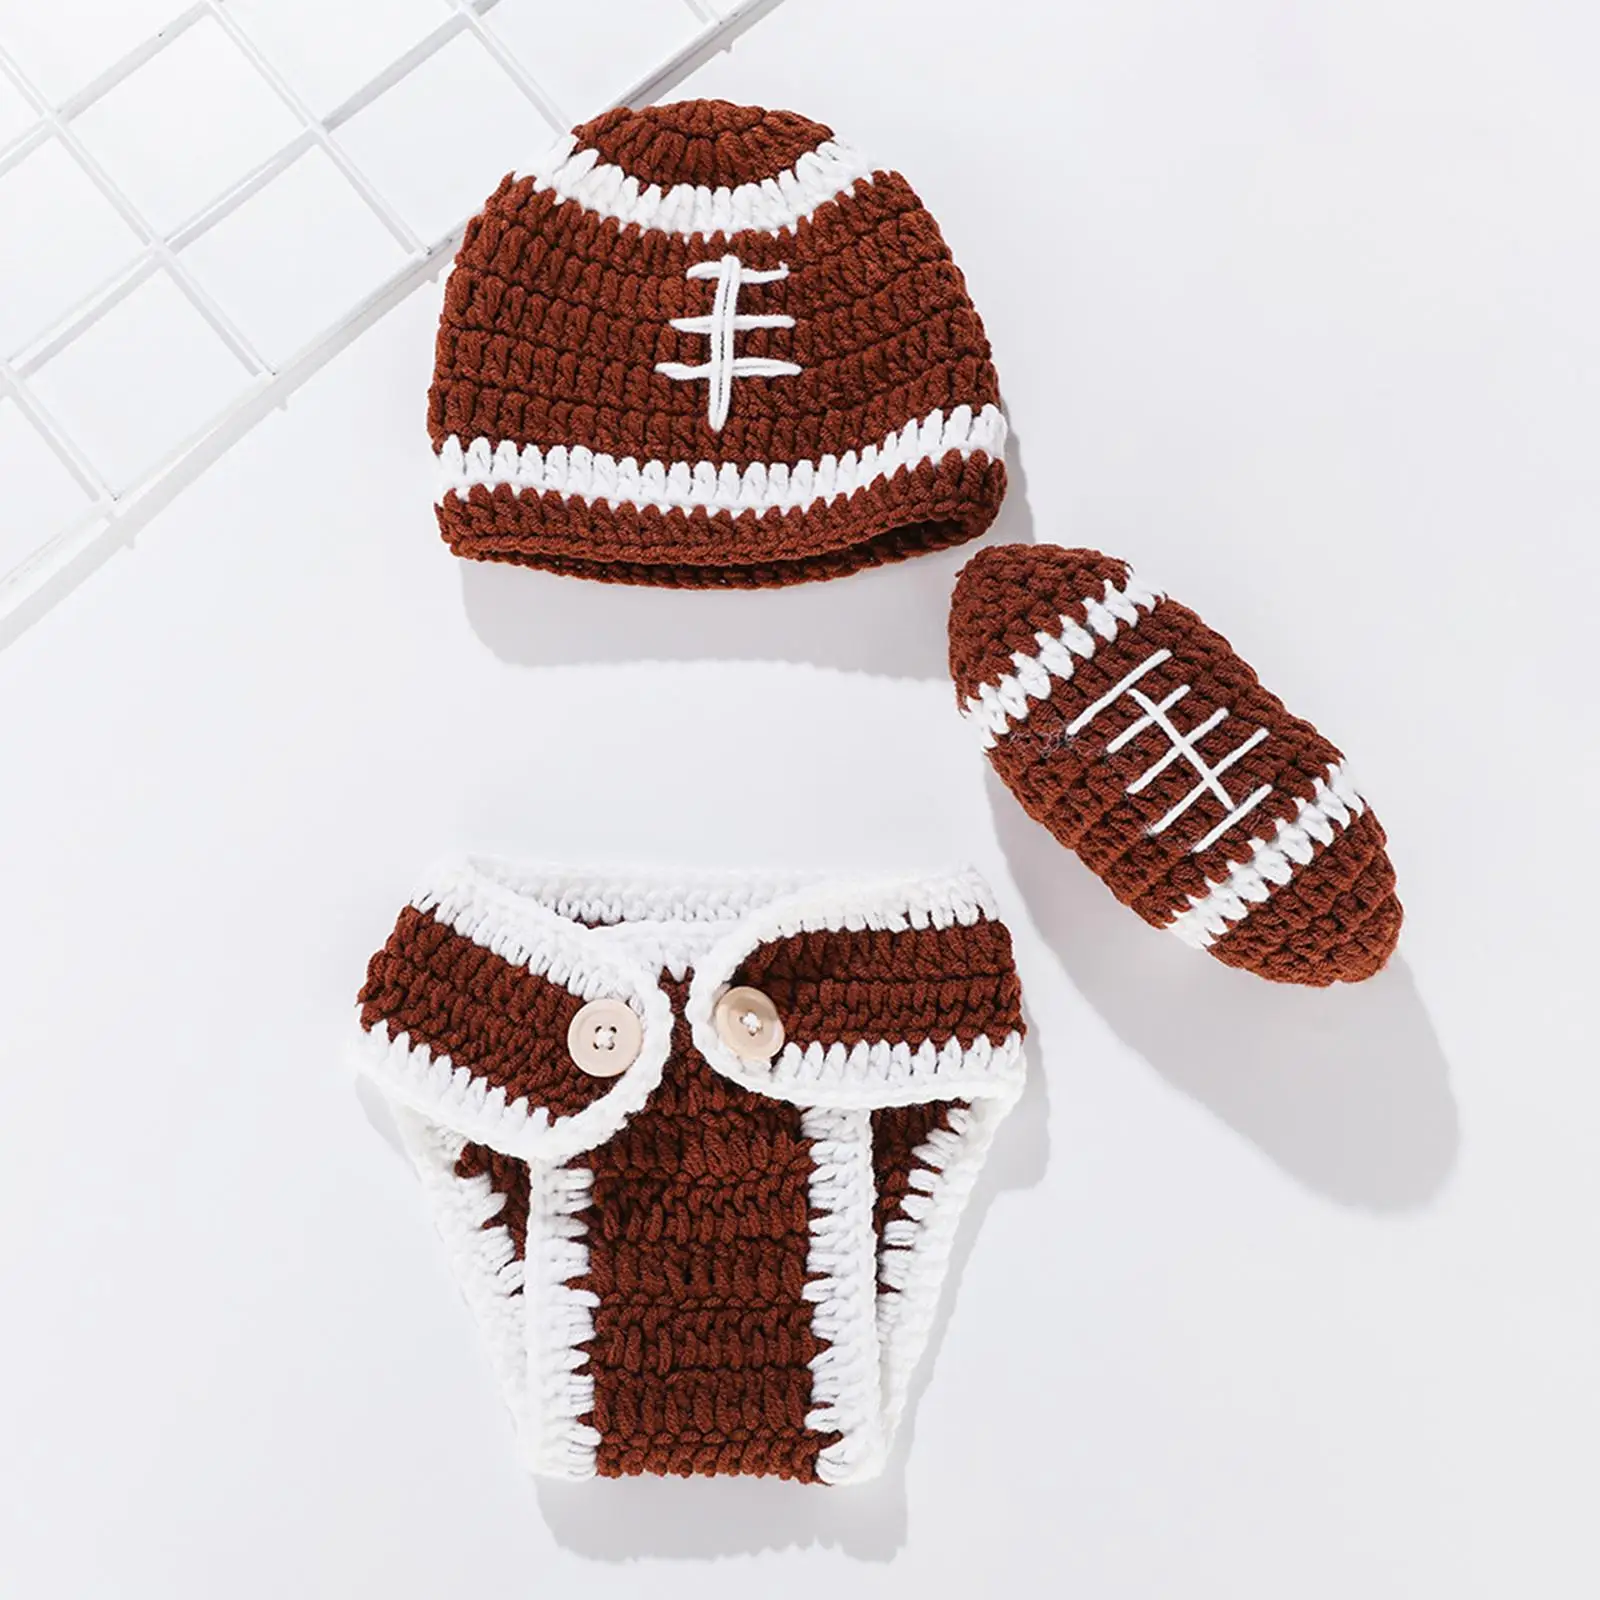 3Pcs Newborn Baby Photo Shoot Clothes Girls Boys Christmas Infant Costume Crochet Outfit Children Photo Prop Clothing Supplies